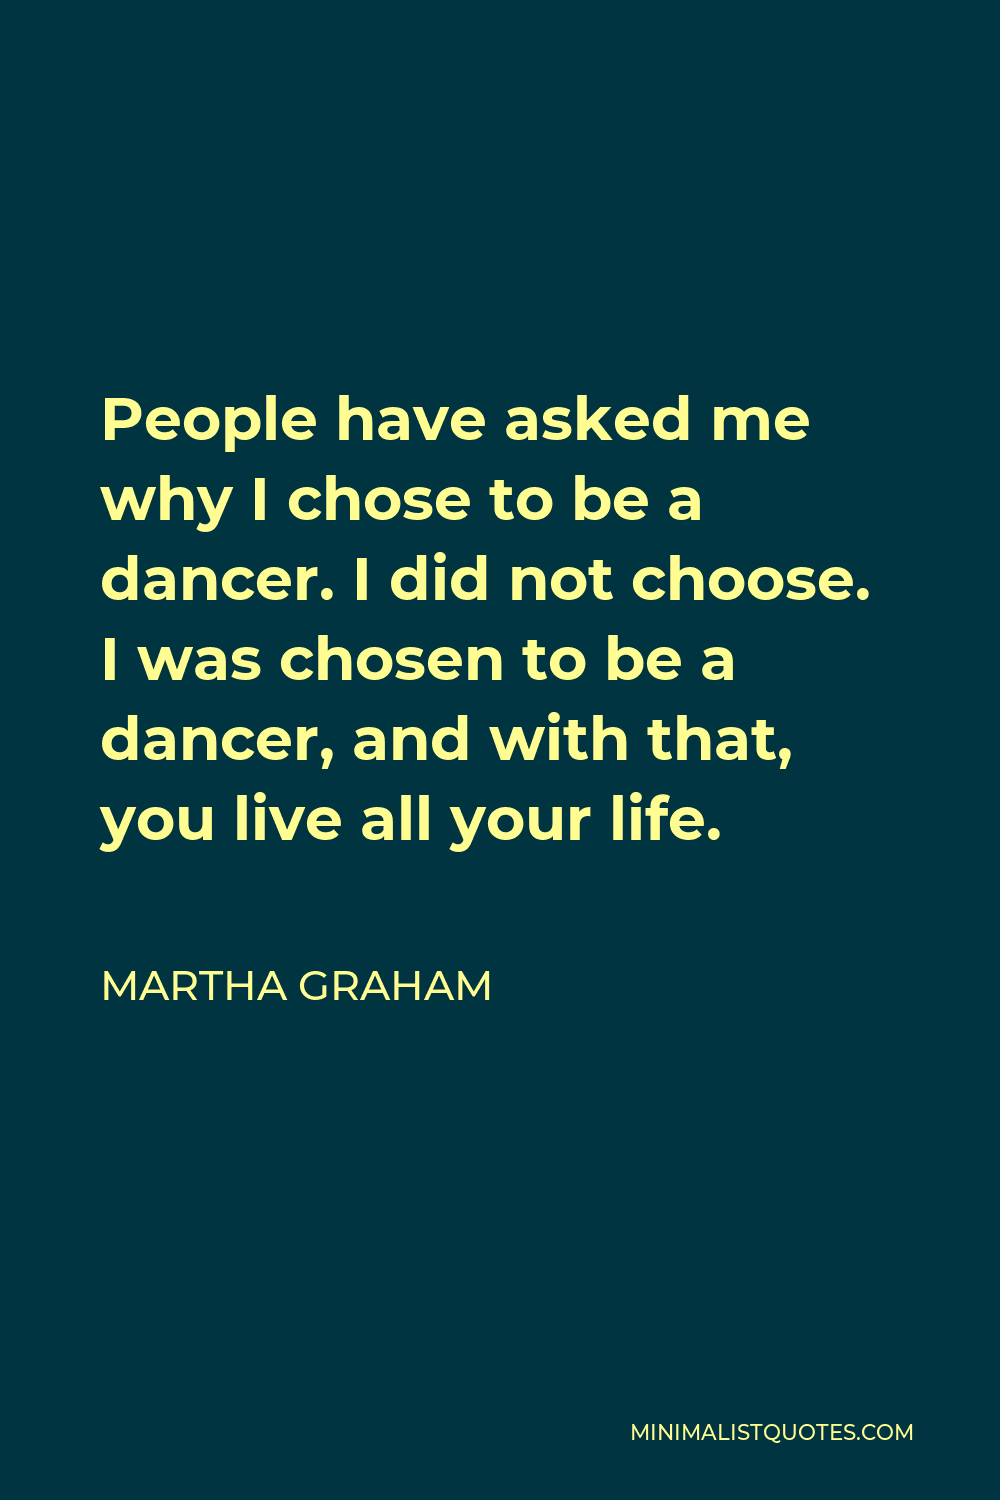 Martha Graham Quote - People have asked me why I chose to be a dancer. I did not choose. I was chosen to be a dancer, and with that, you live all your life.